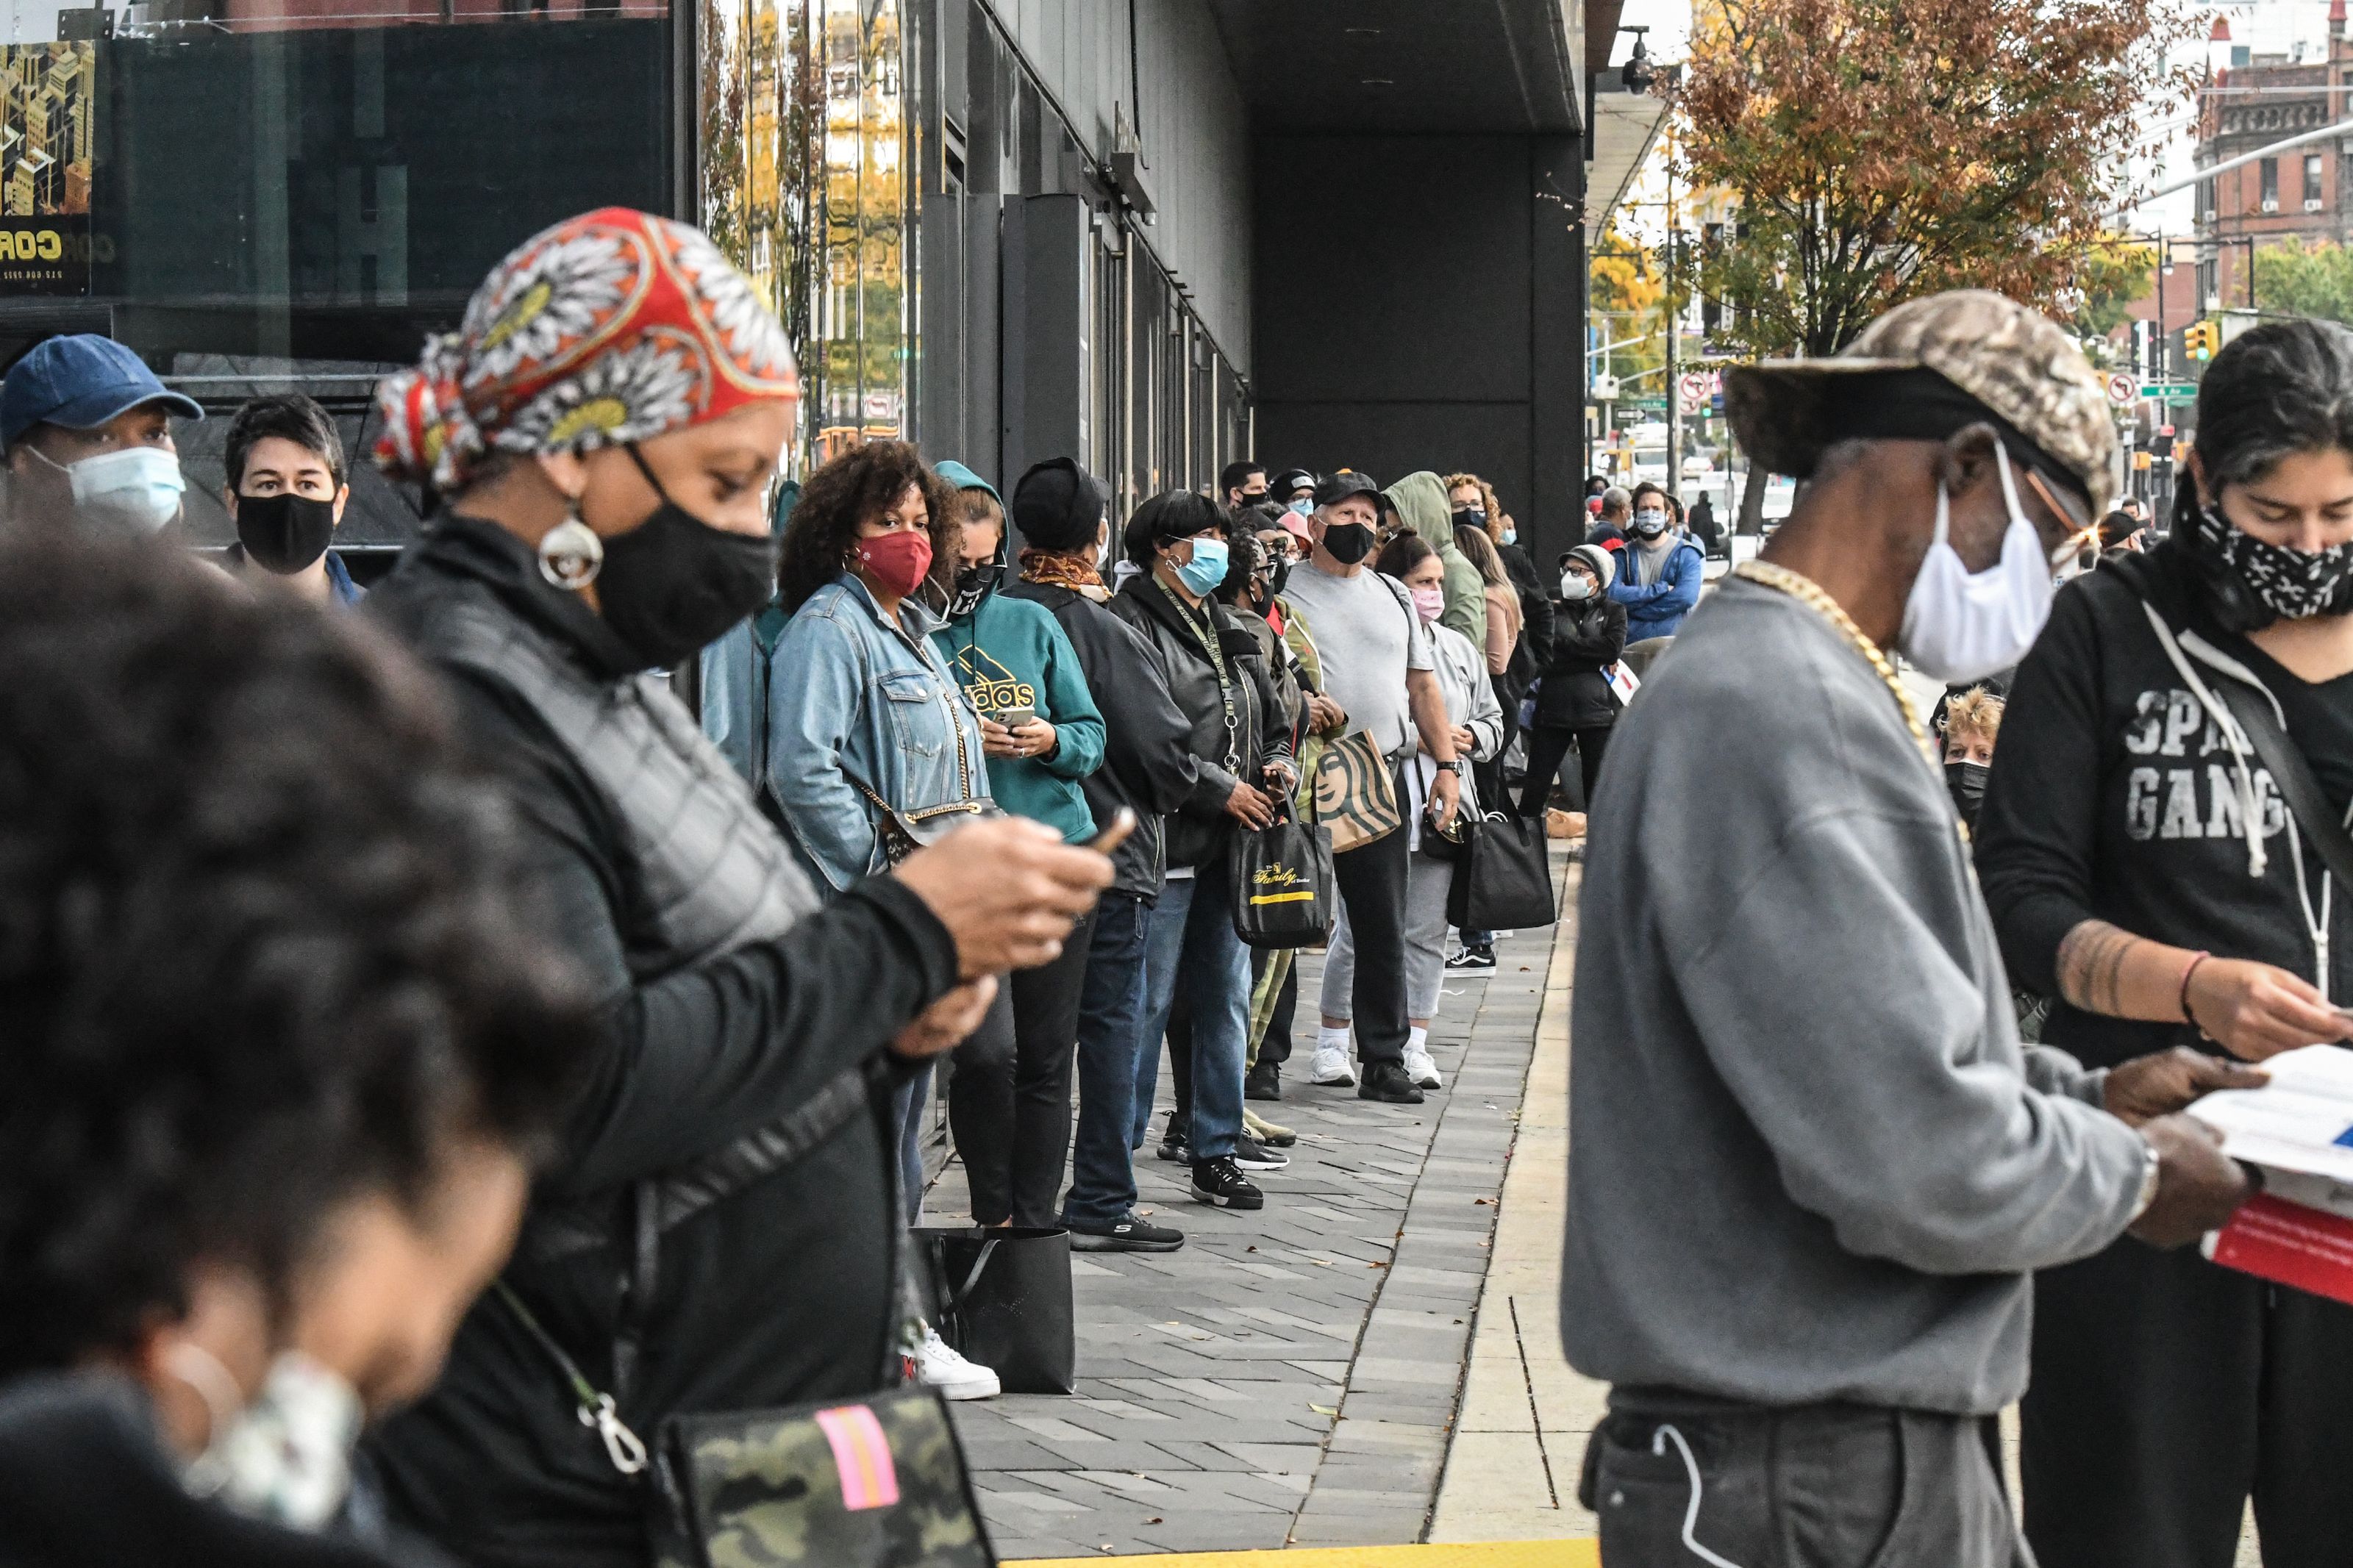 Voters outside the Barclays Center. Photo: Stephanie Keith/Getty Images